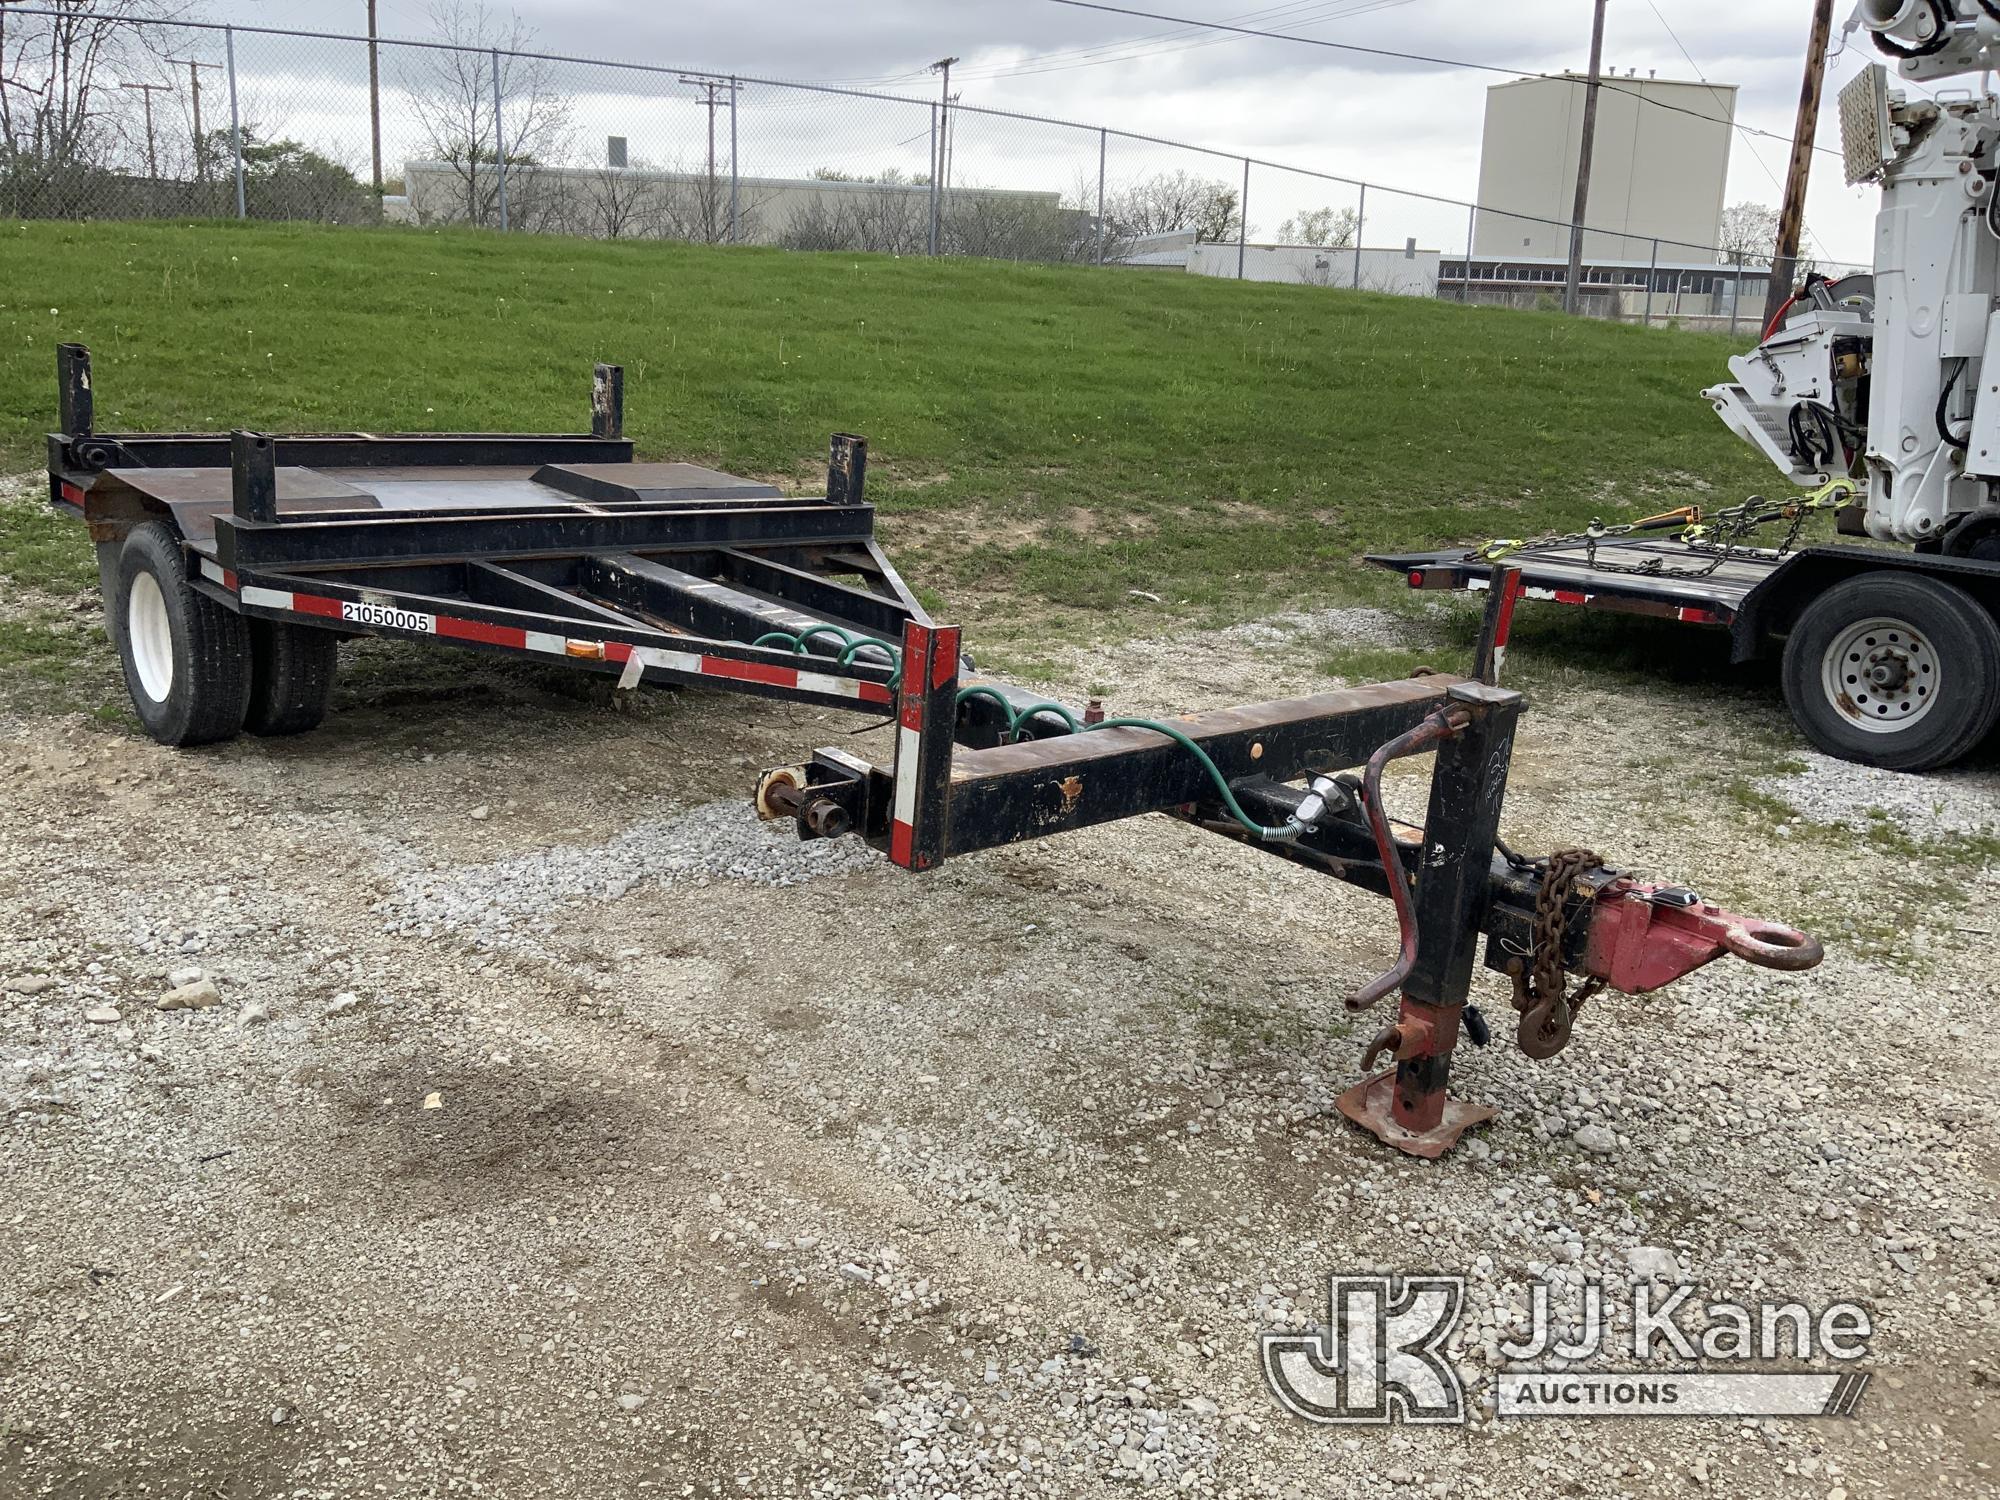 (Fort Wayne, IN) 1998 Brindle S/A Extendable Pole Trailer